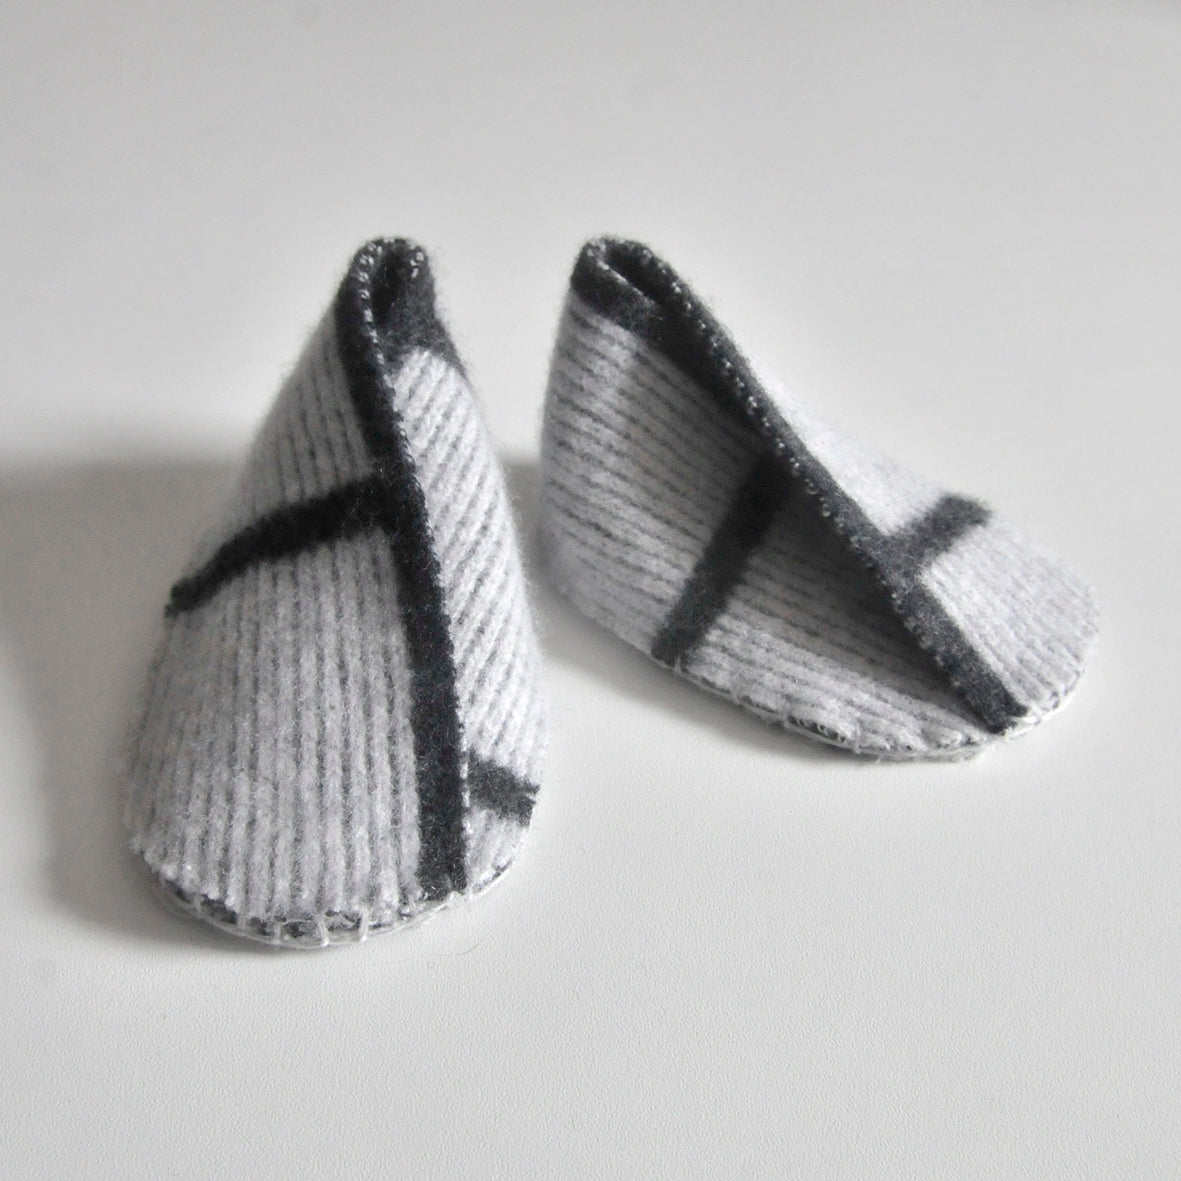 GRID BABY BOOTIE IN GREY AND GREY